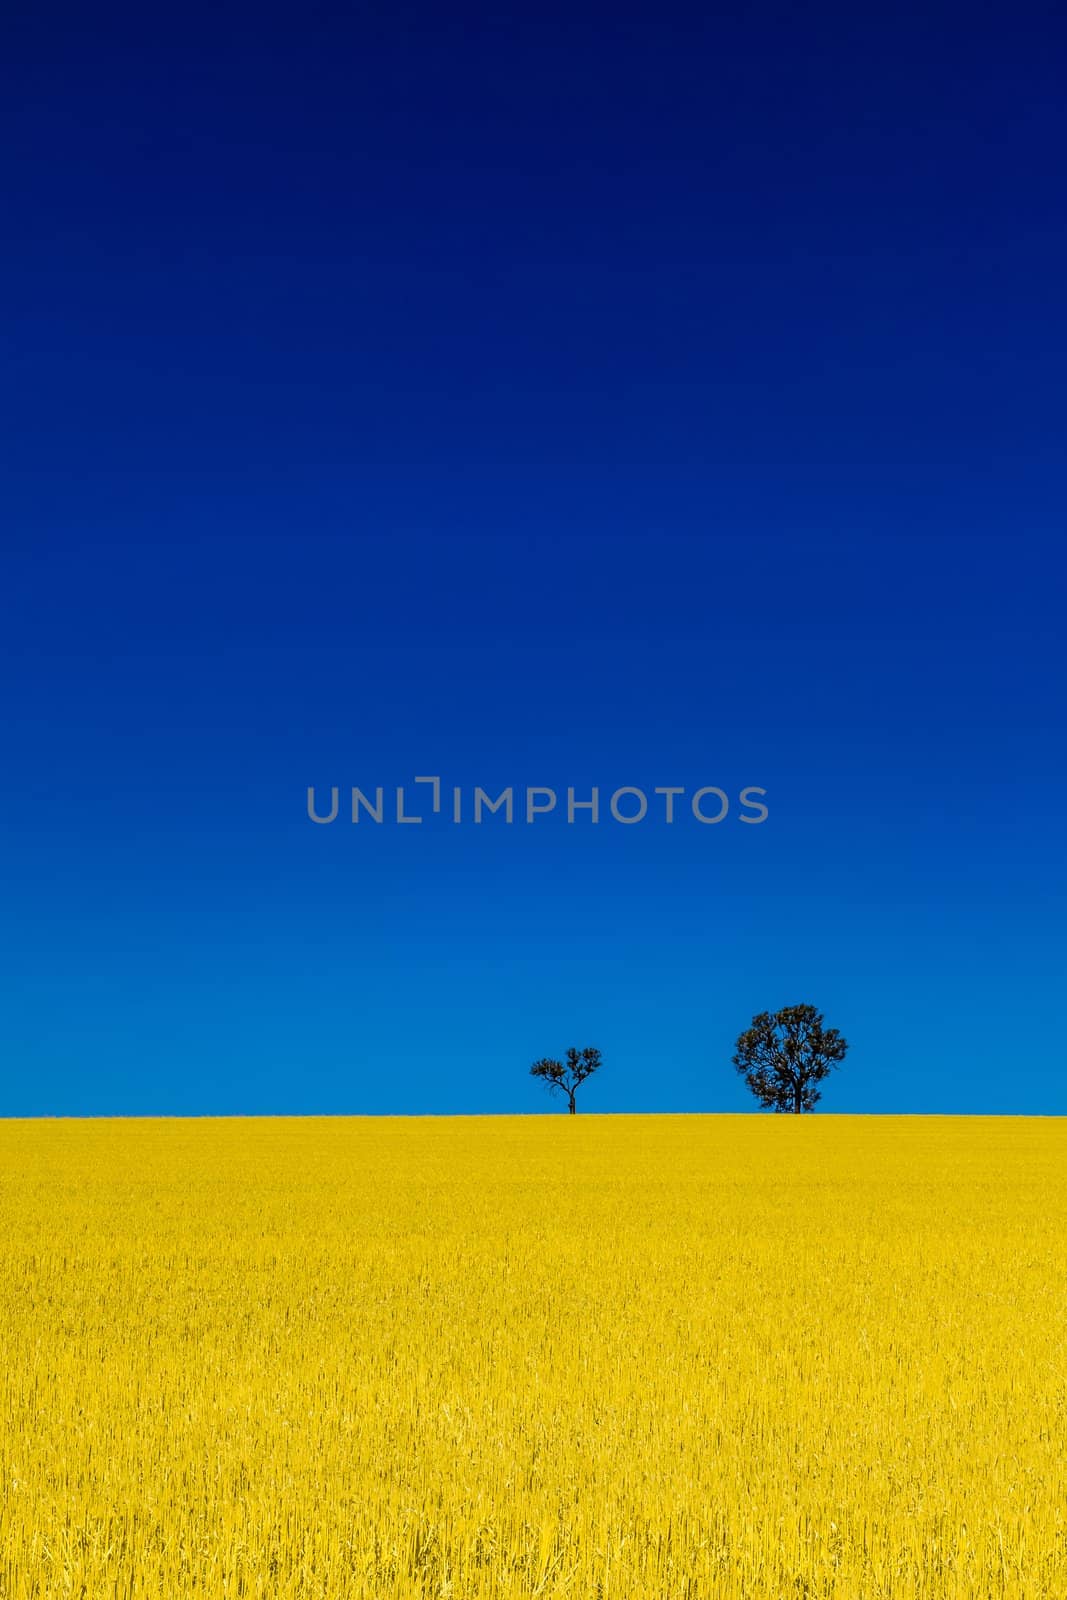 Trees in a bright yellow wheat field with blue sky by hangingpixels